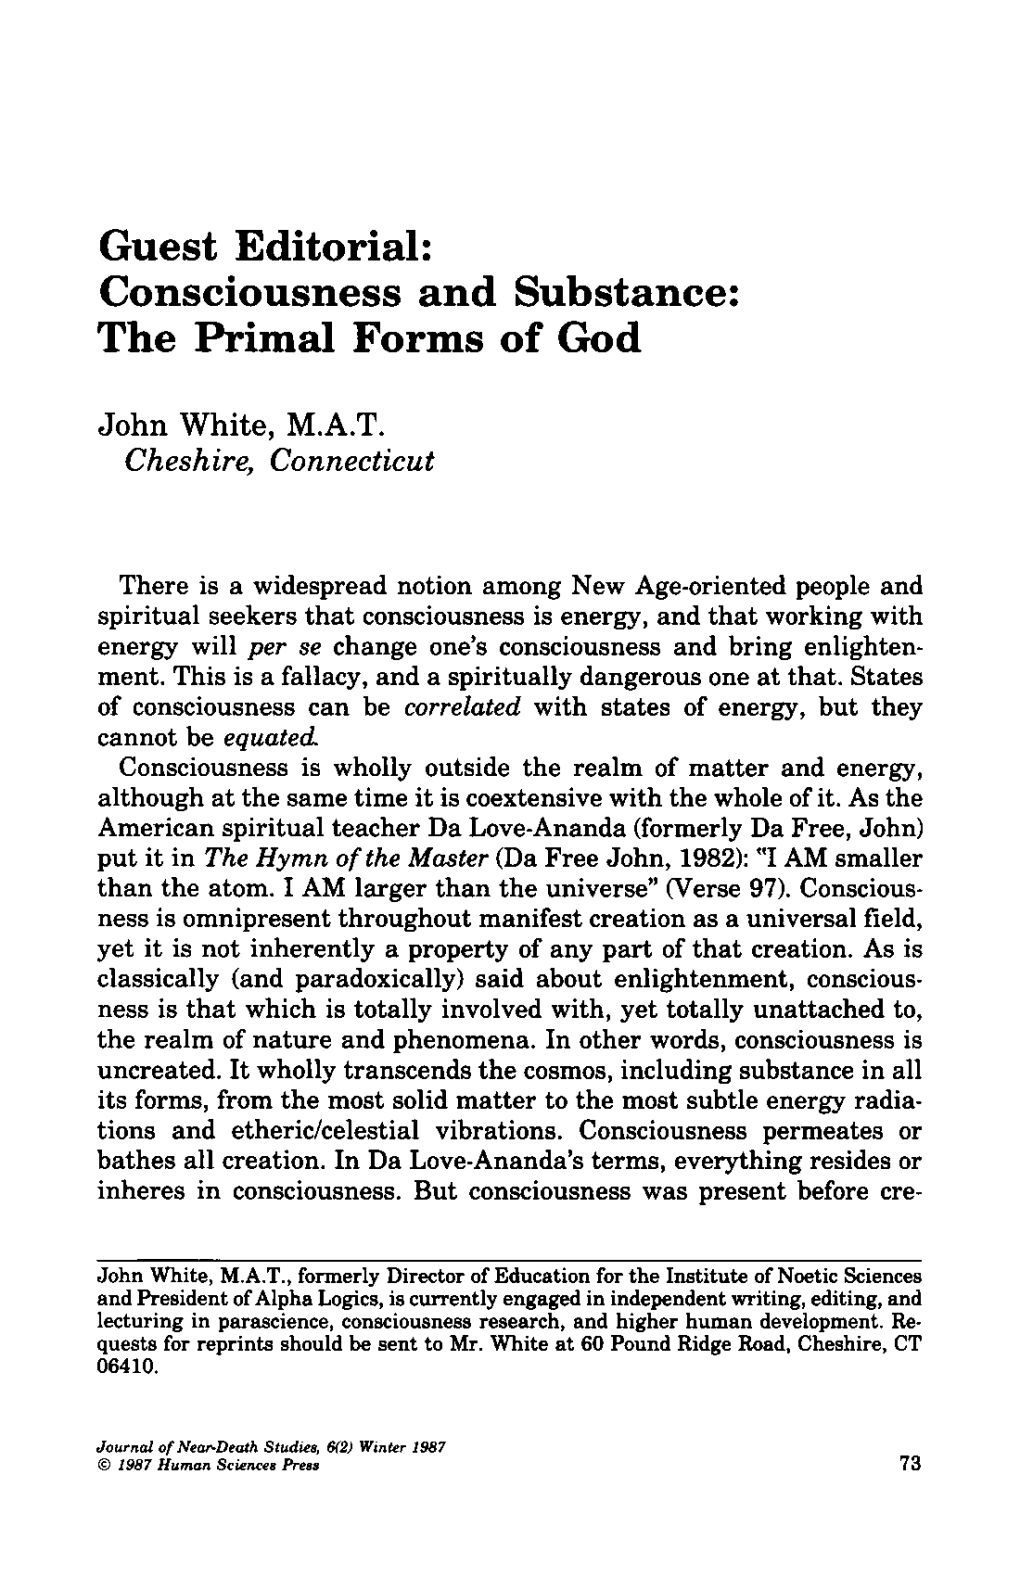 Consciousness and Substance: the Primal Forms of God